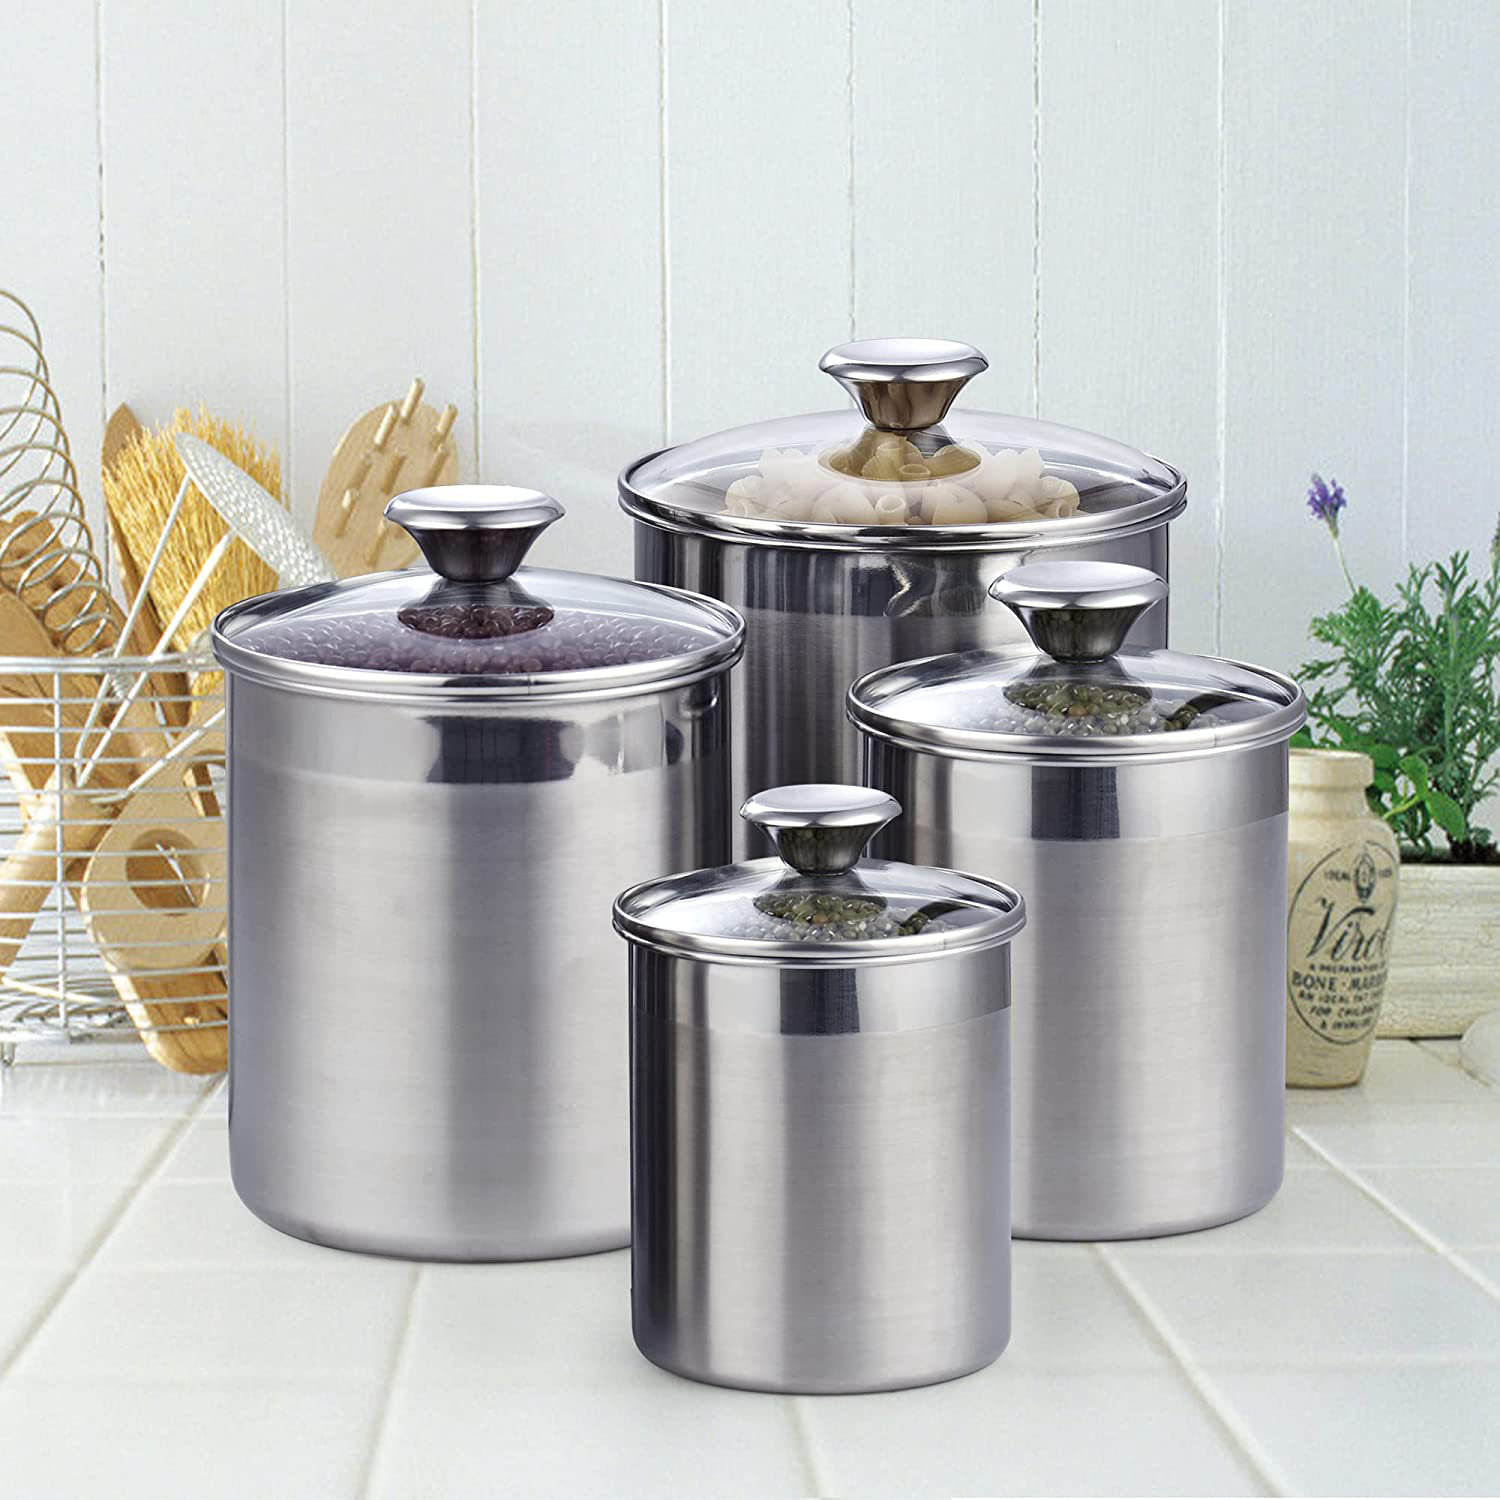 Tramontina 4 PC Stainless Steel Canister Set - Black